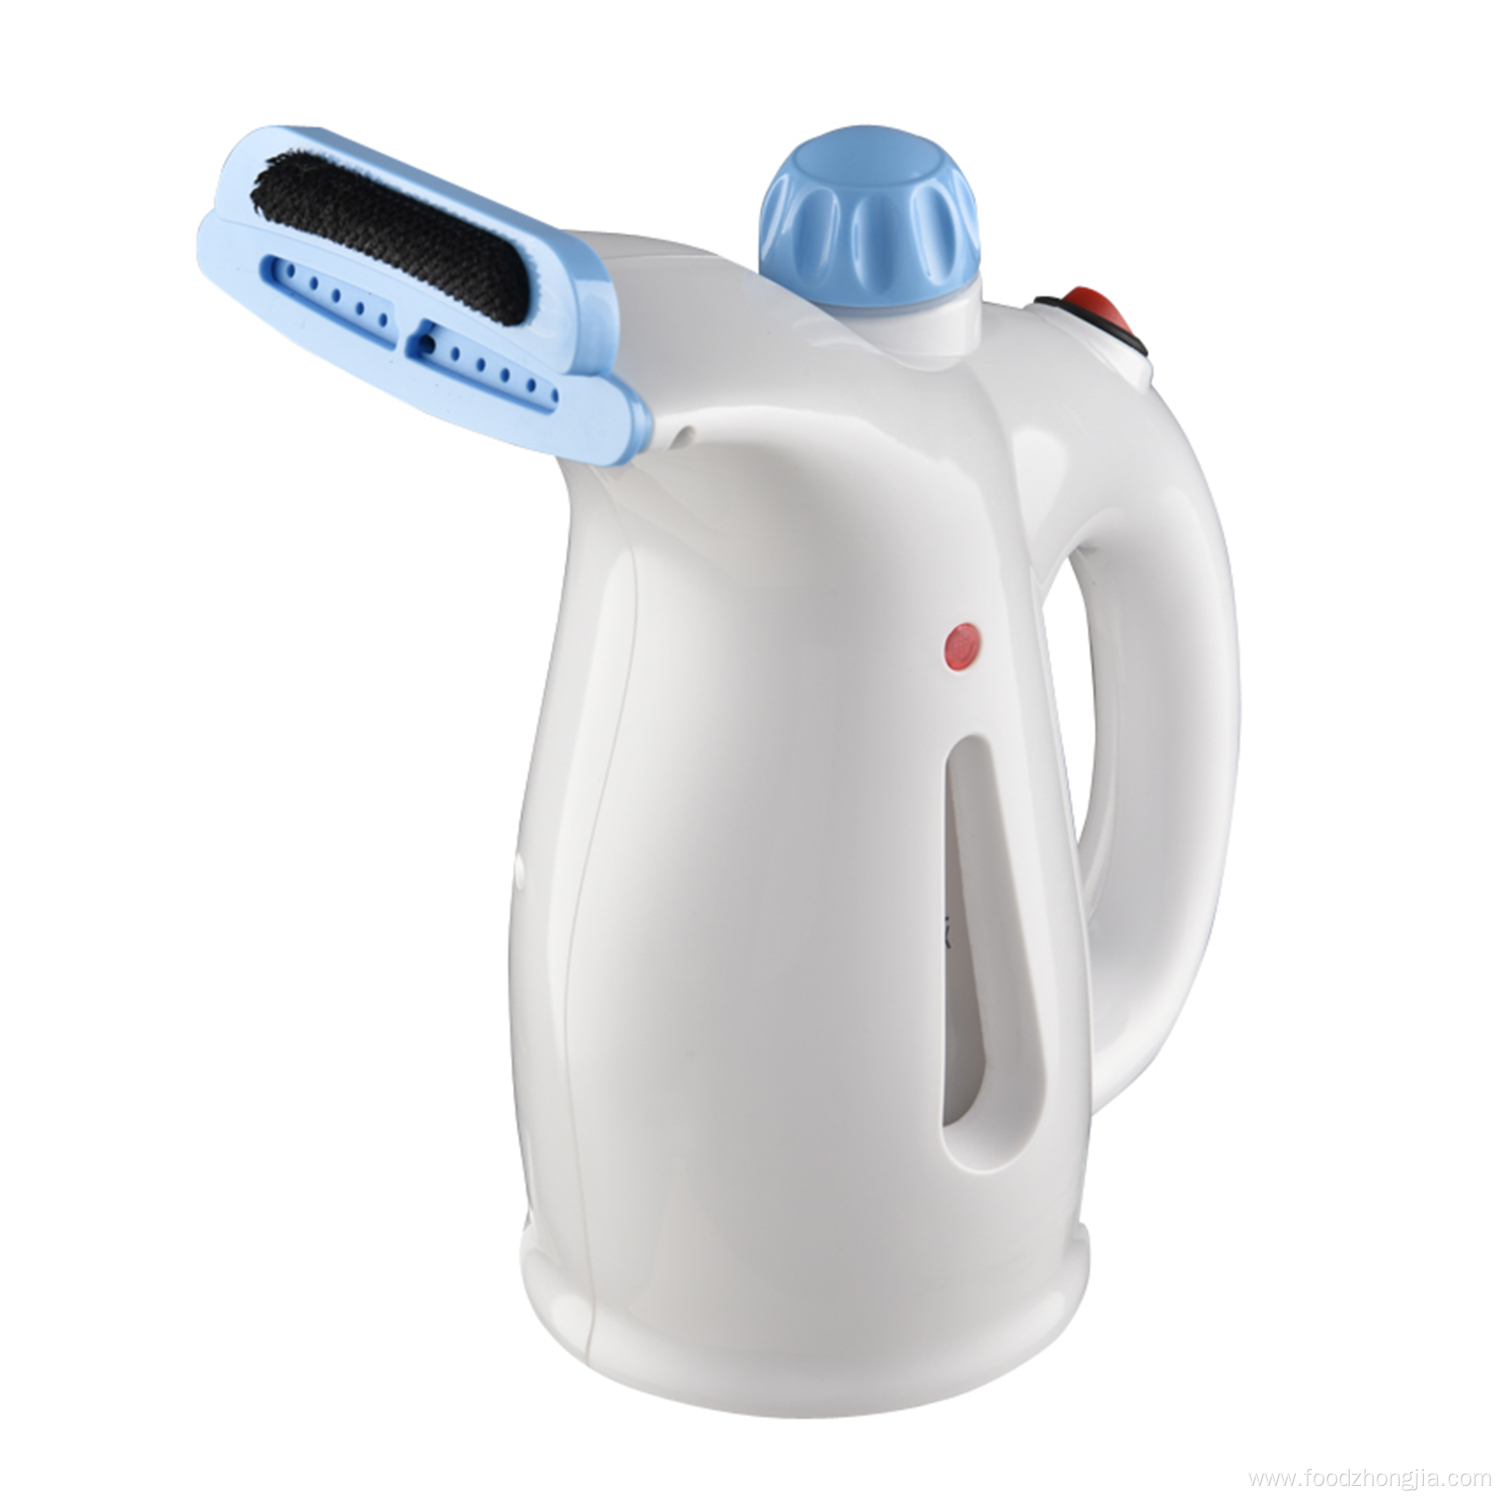 Widely Mini Household Hand-Held Electrical Garment Steamer